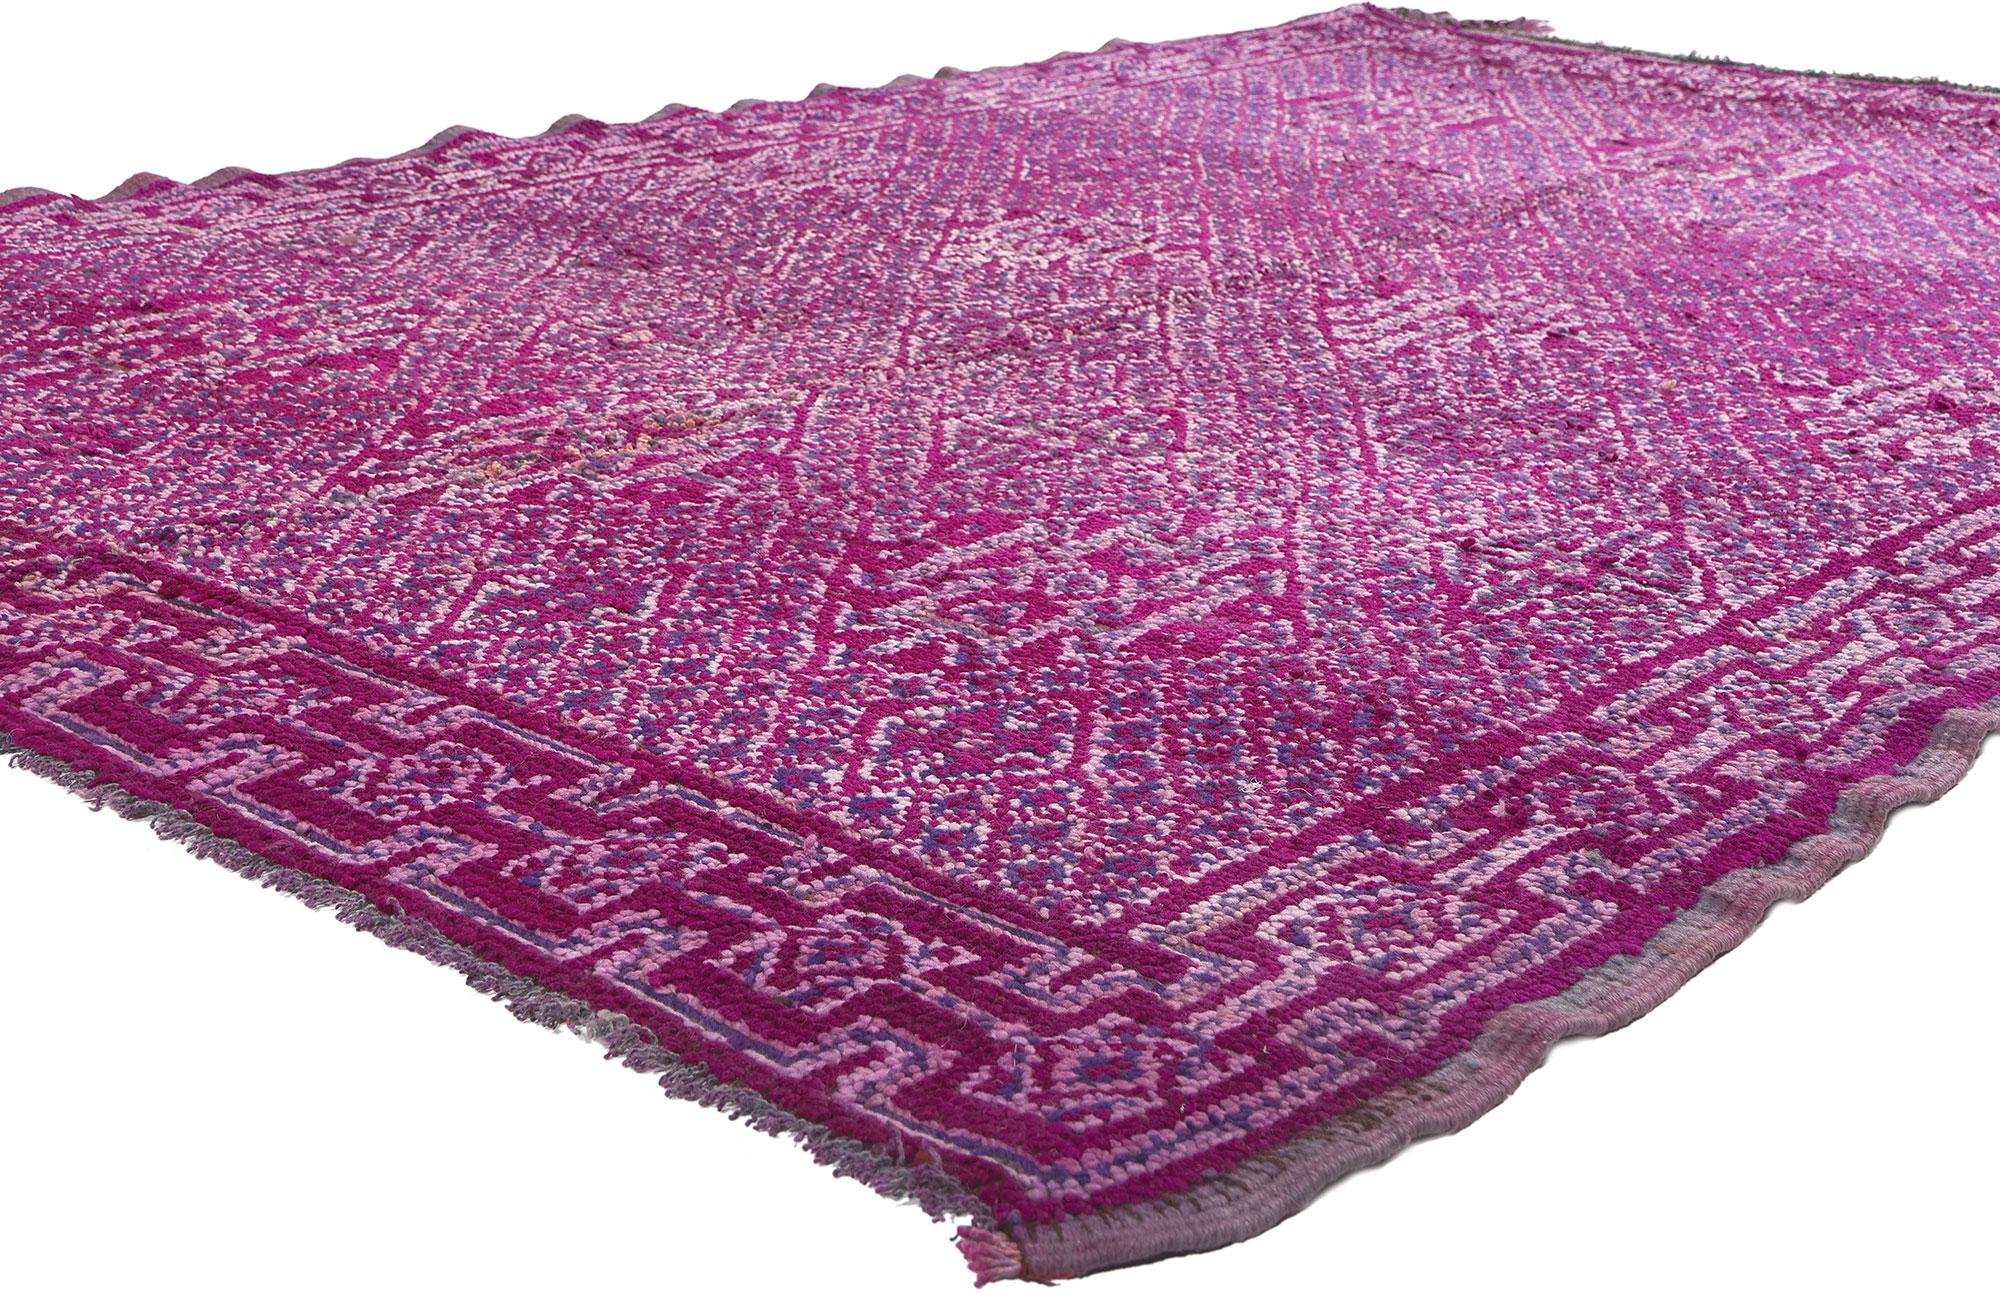 20959 Vintage Purple Beni MGuild Moroccan Rug, 06'01 x 09'04. 

Crafted by the skilled hands of Berber women from the Ait M'Guild tribe in the Atlas Mountains of Morocco, Beni Mguild rugs are celebrated for their high-quality wool and intricate